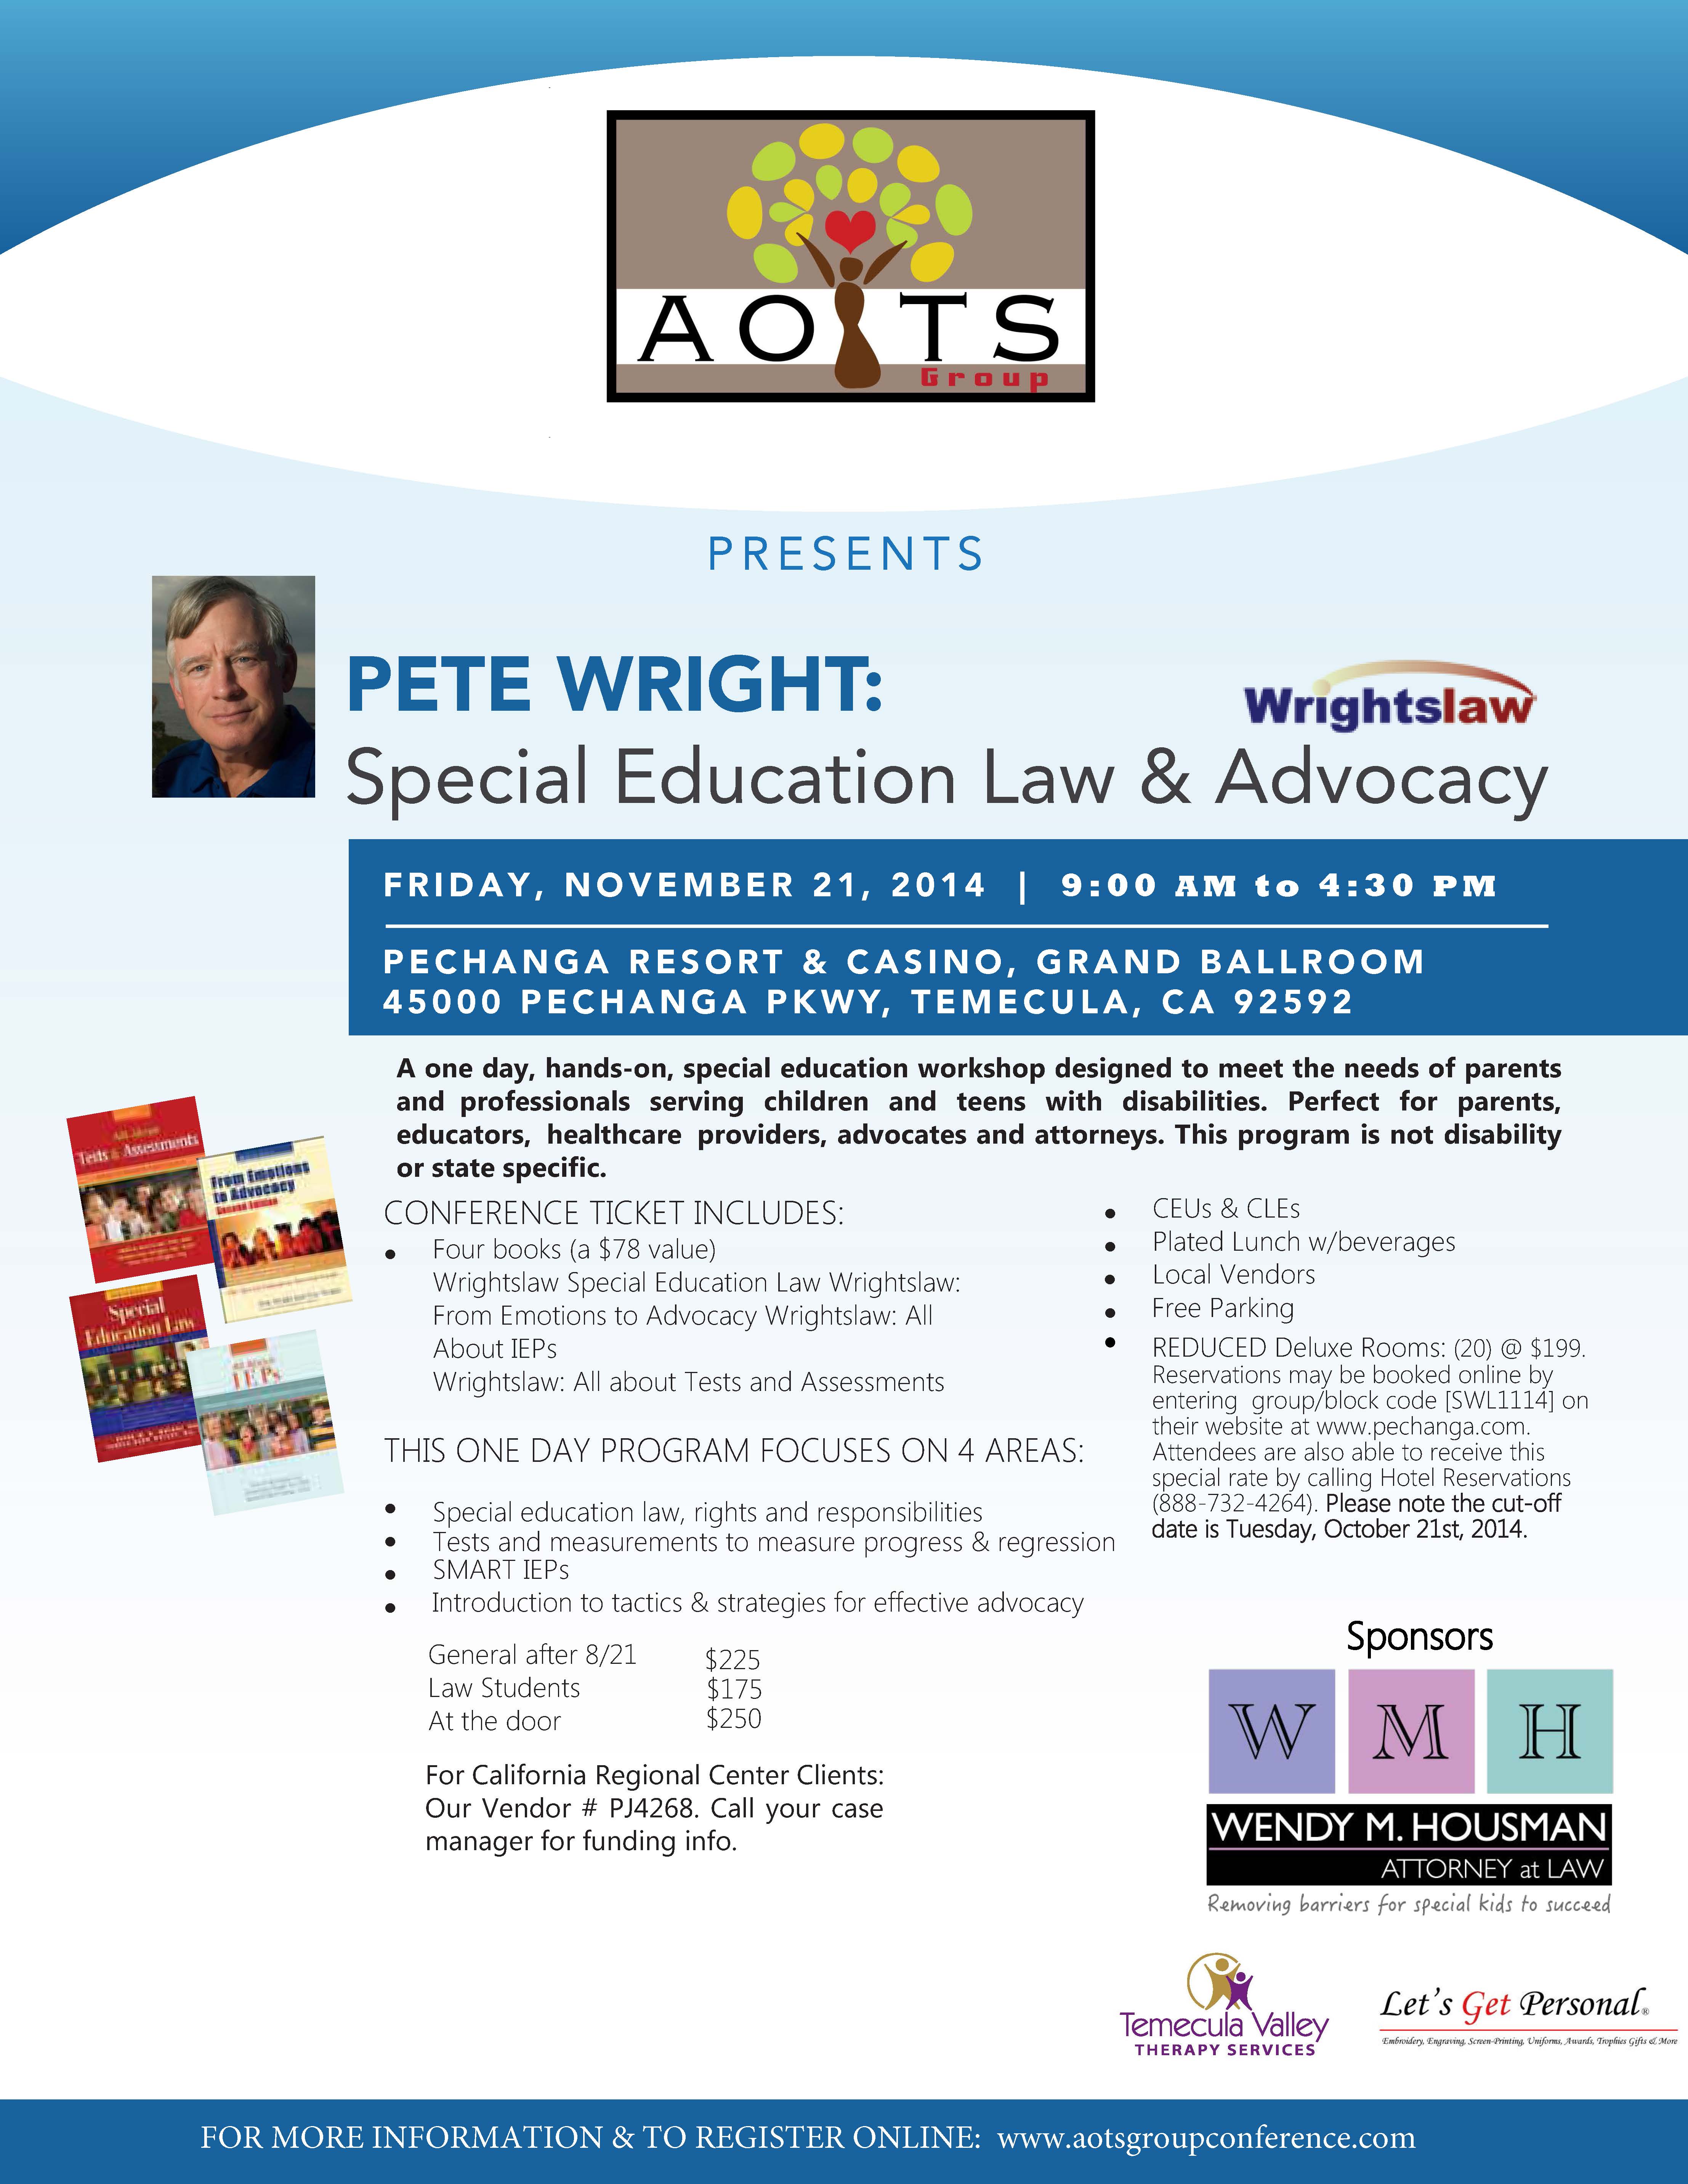 Wrightslaw Conference Flyer